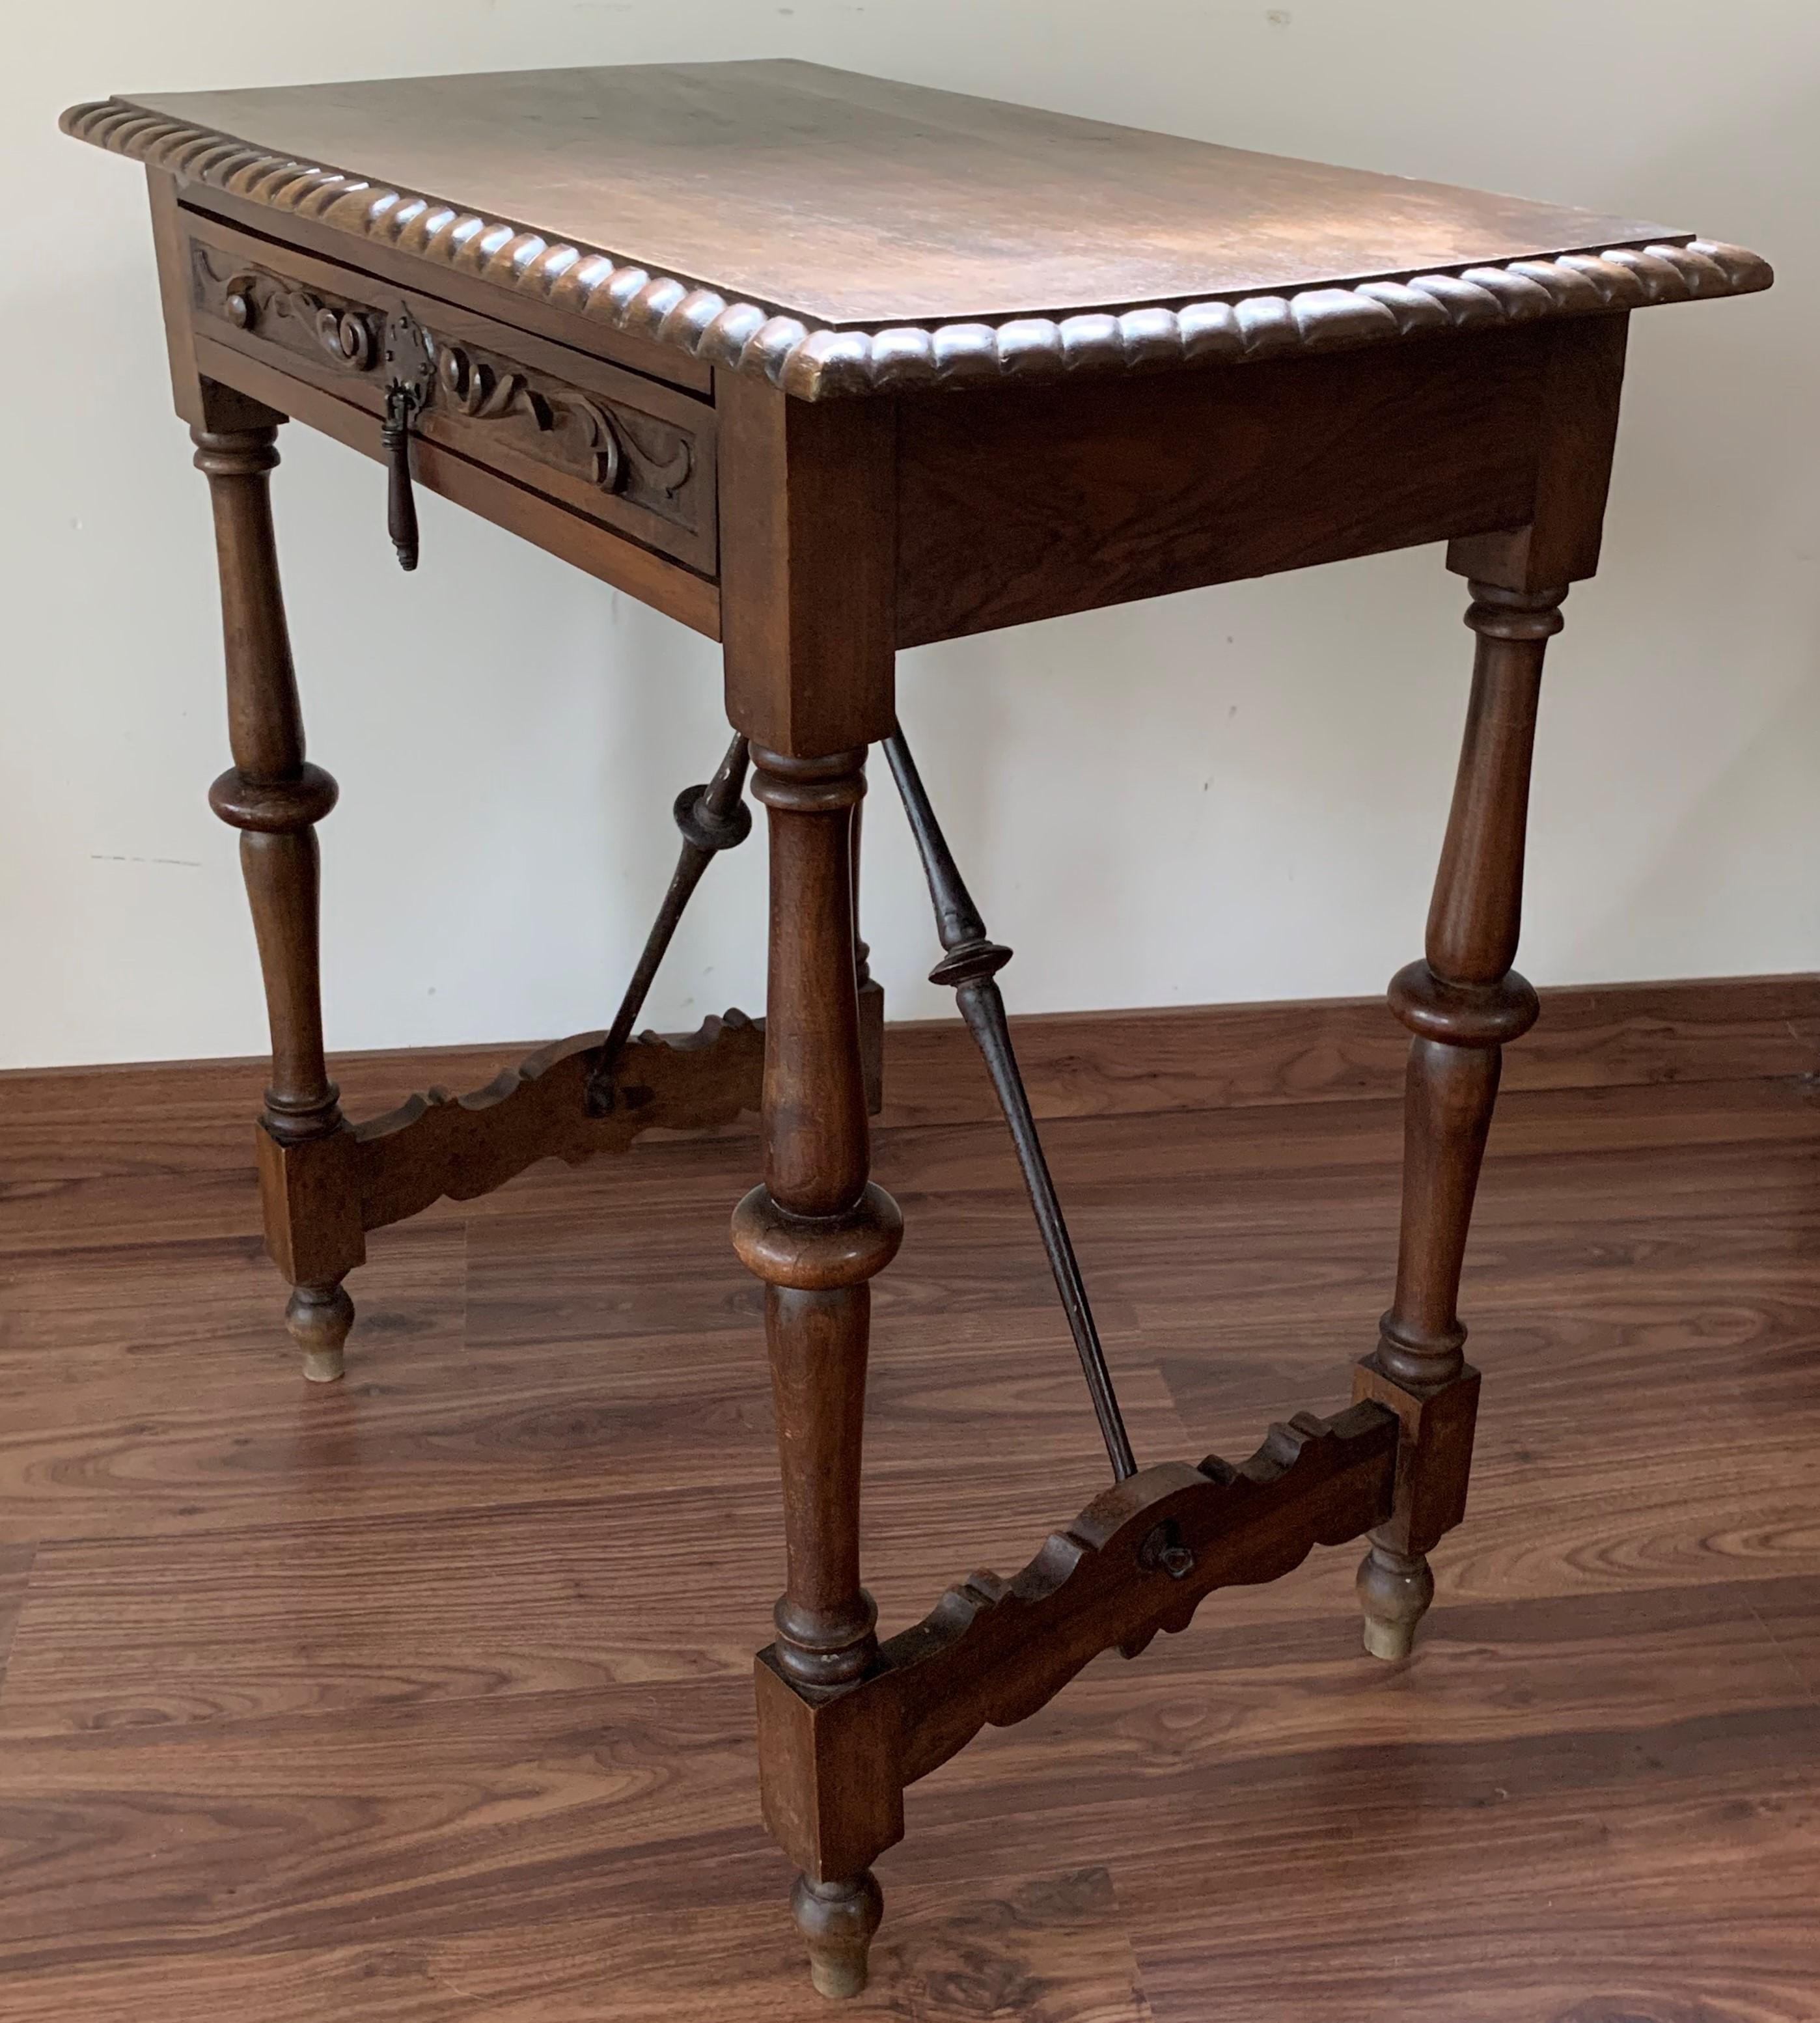 A Spanish walnut side table with single drawer, scalloped apron and carved legs from the late 19th-early 20th century. This elegant Spanish table features a simple, rectangular top with carved edges sitting above a drawer. The table is raised on an